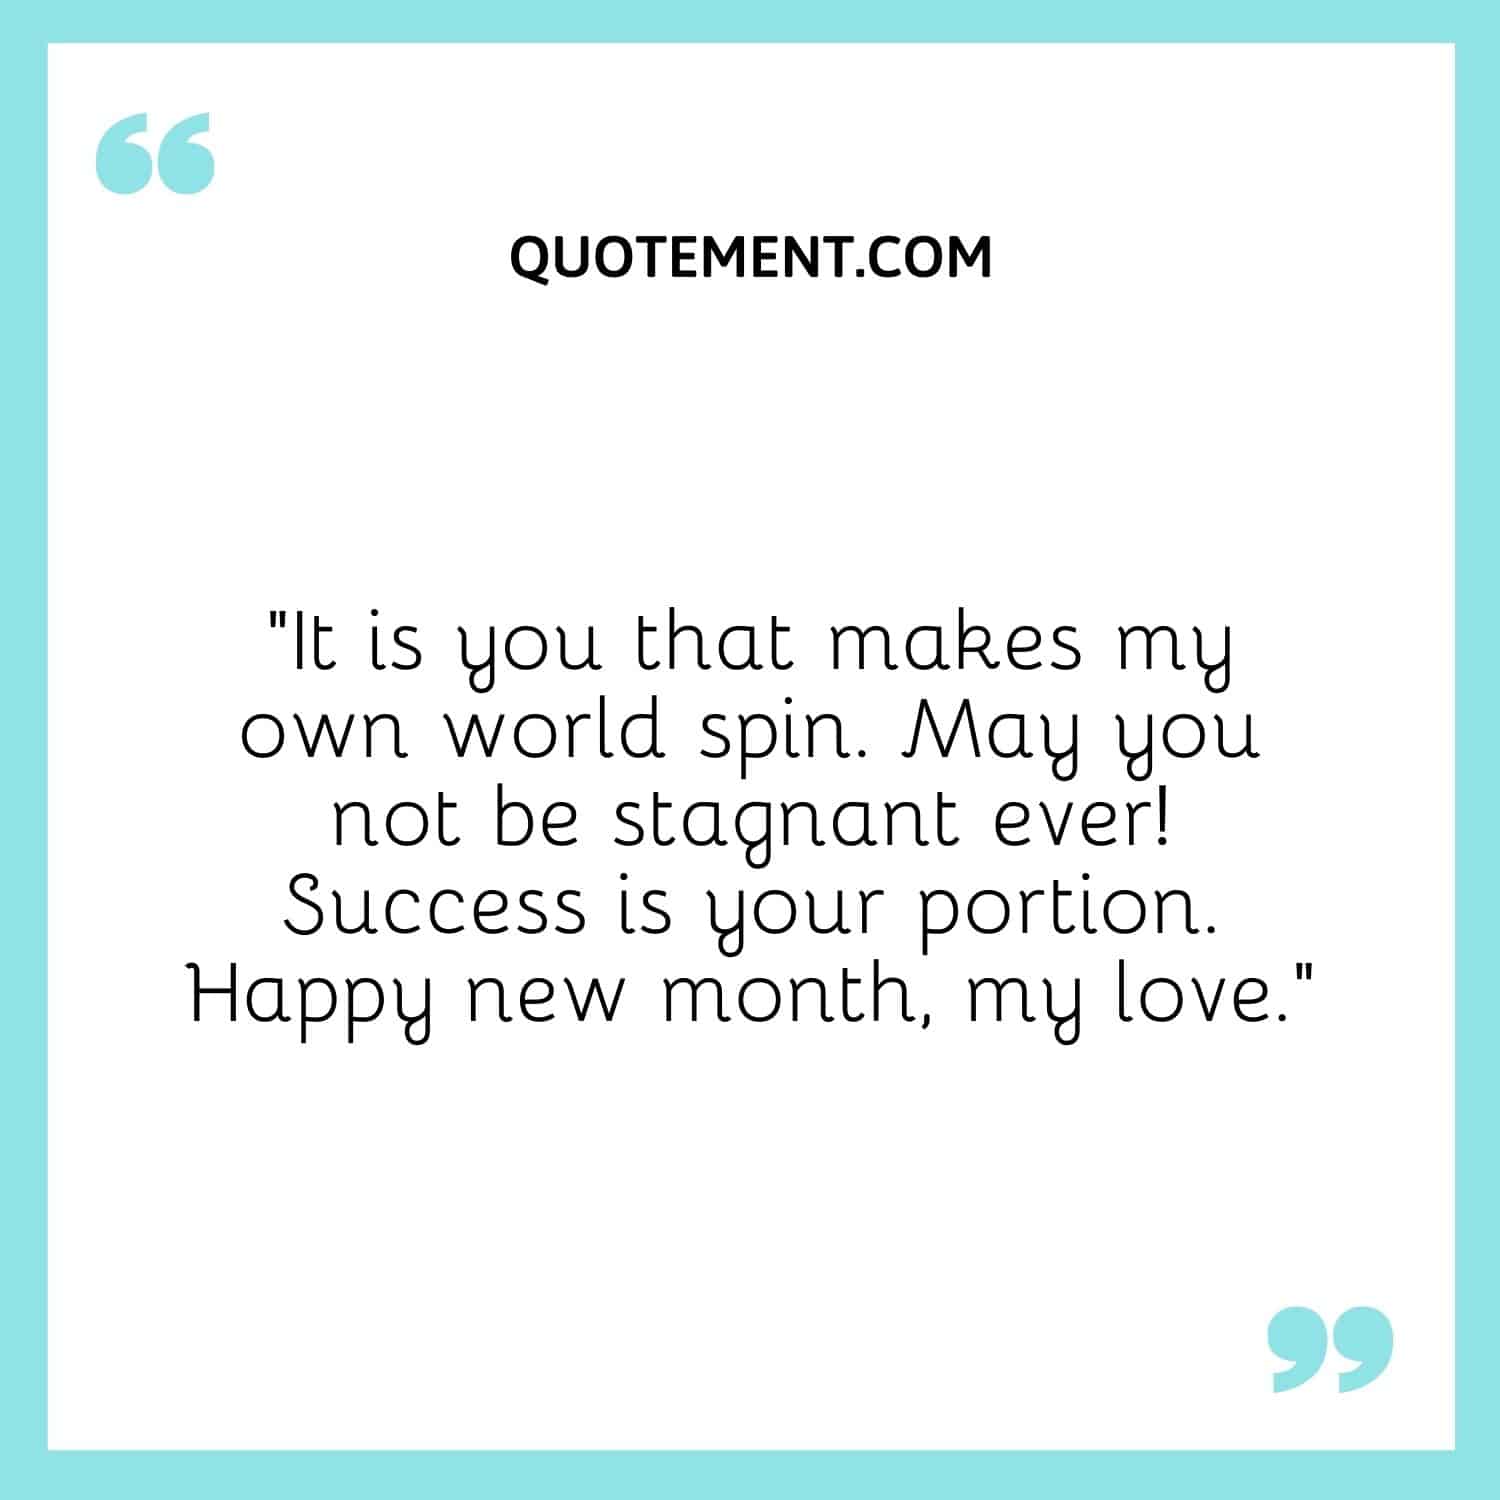 It is you that makes my own world spin